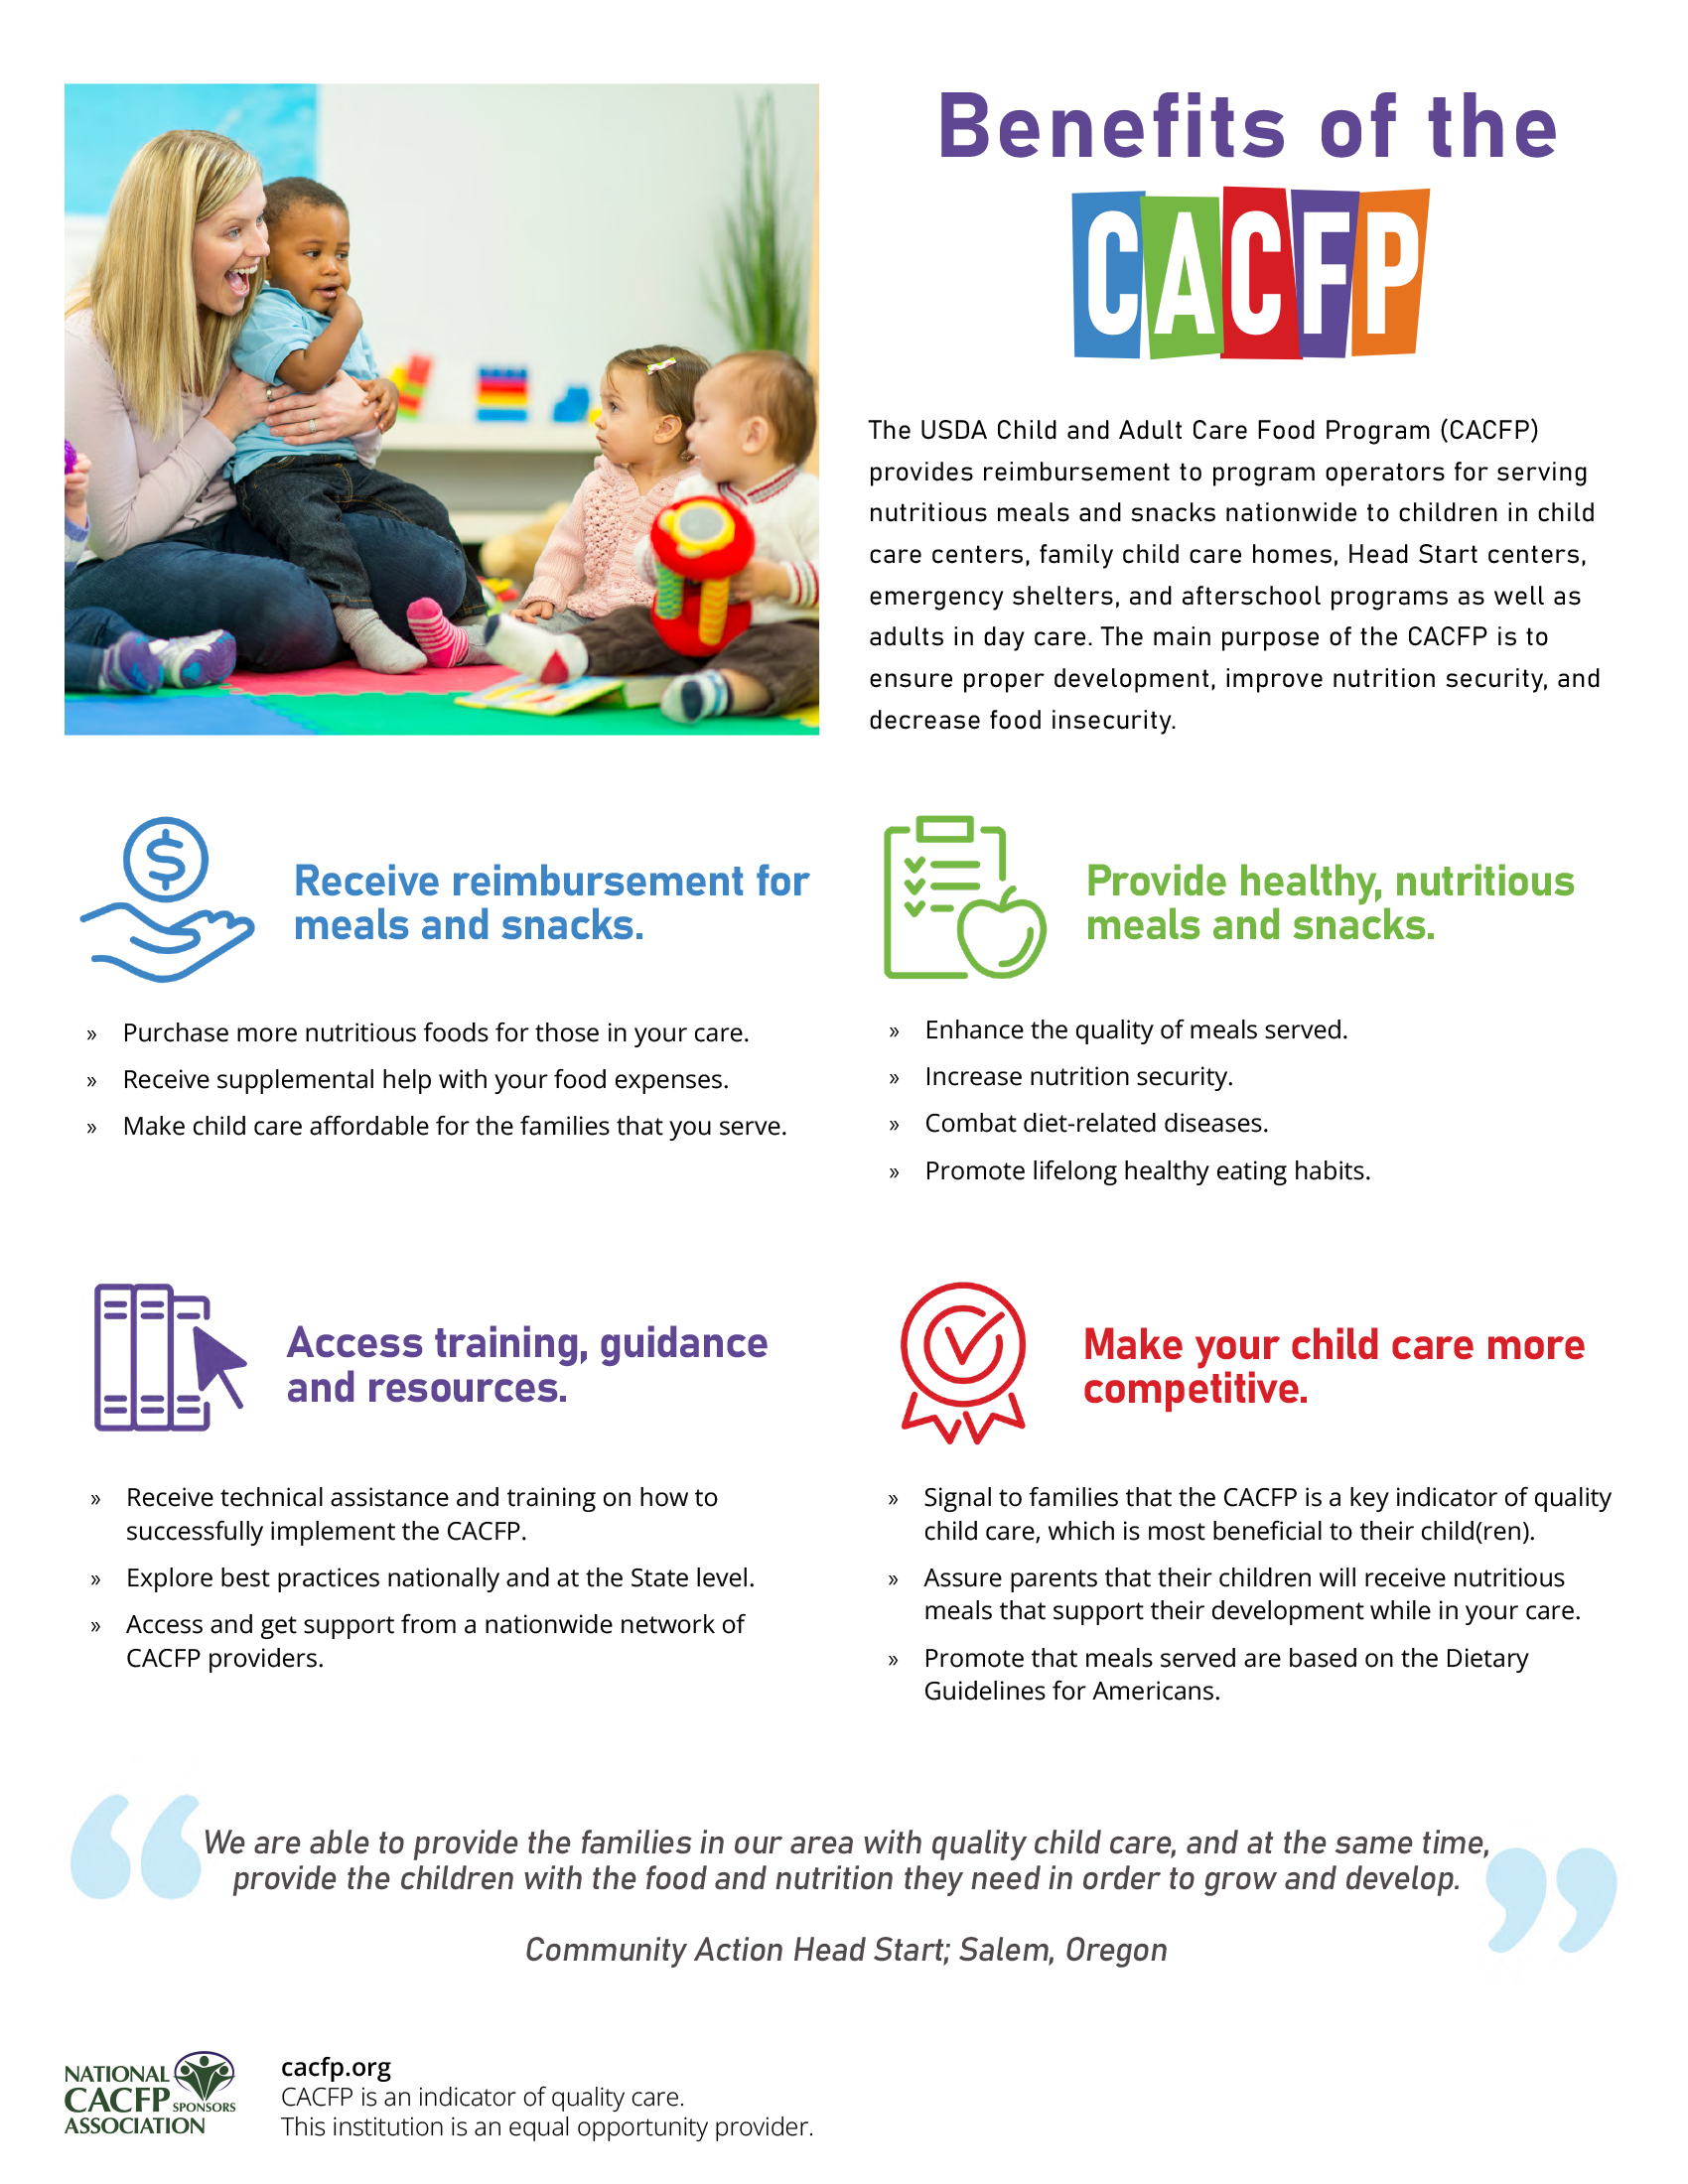 Benefits of CACFP